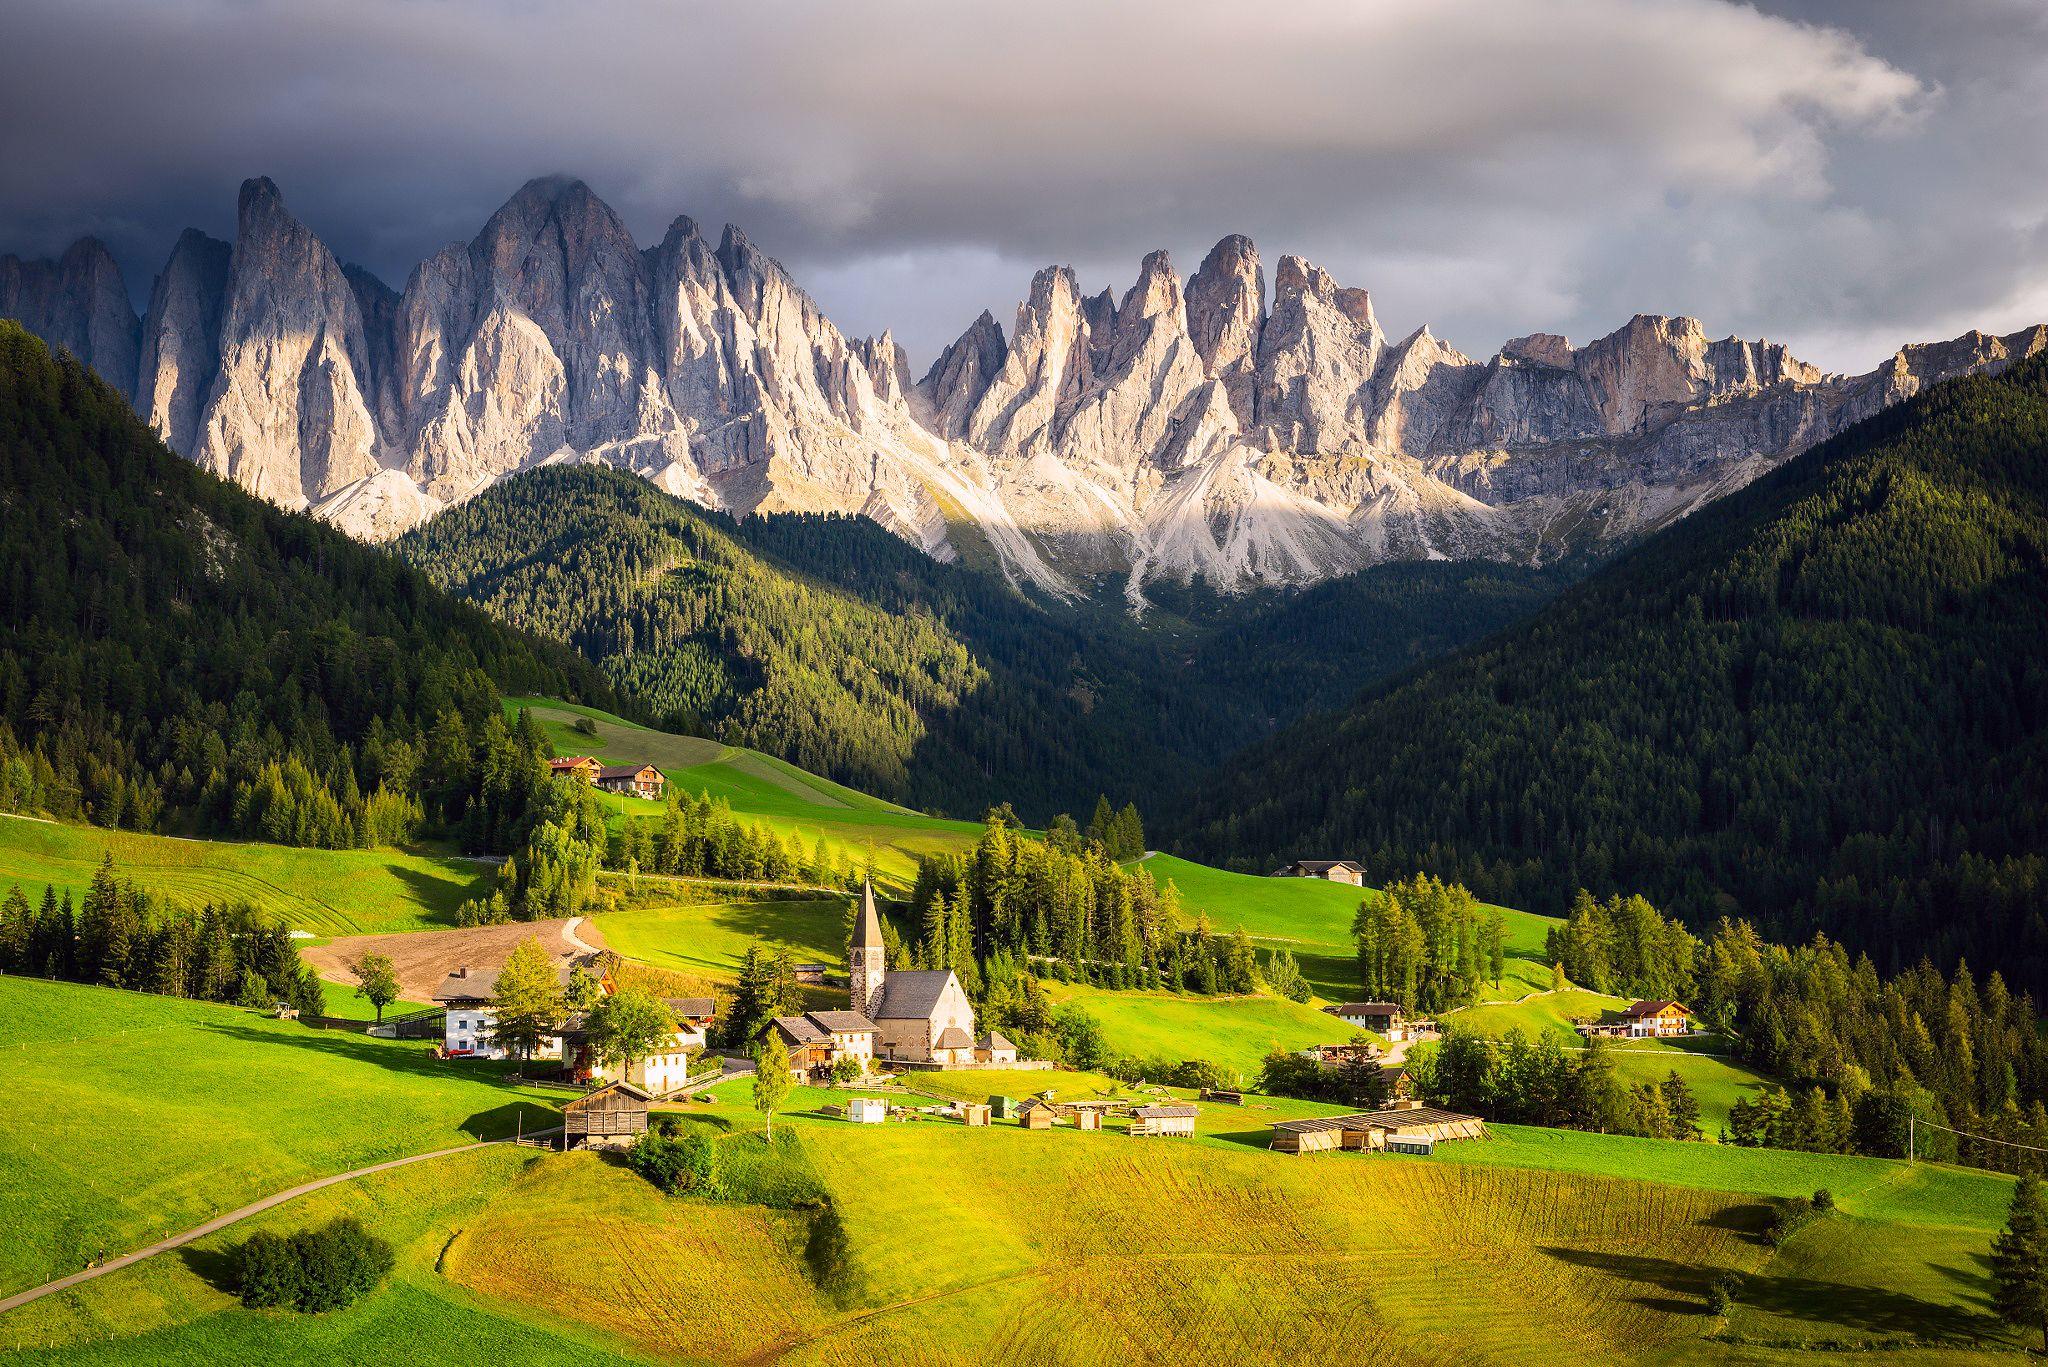 Dolomites Photos, Download The BEST Free Dolomites Stock Photos & HD Images